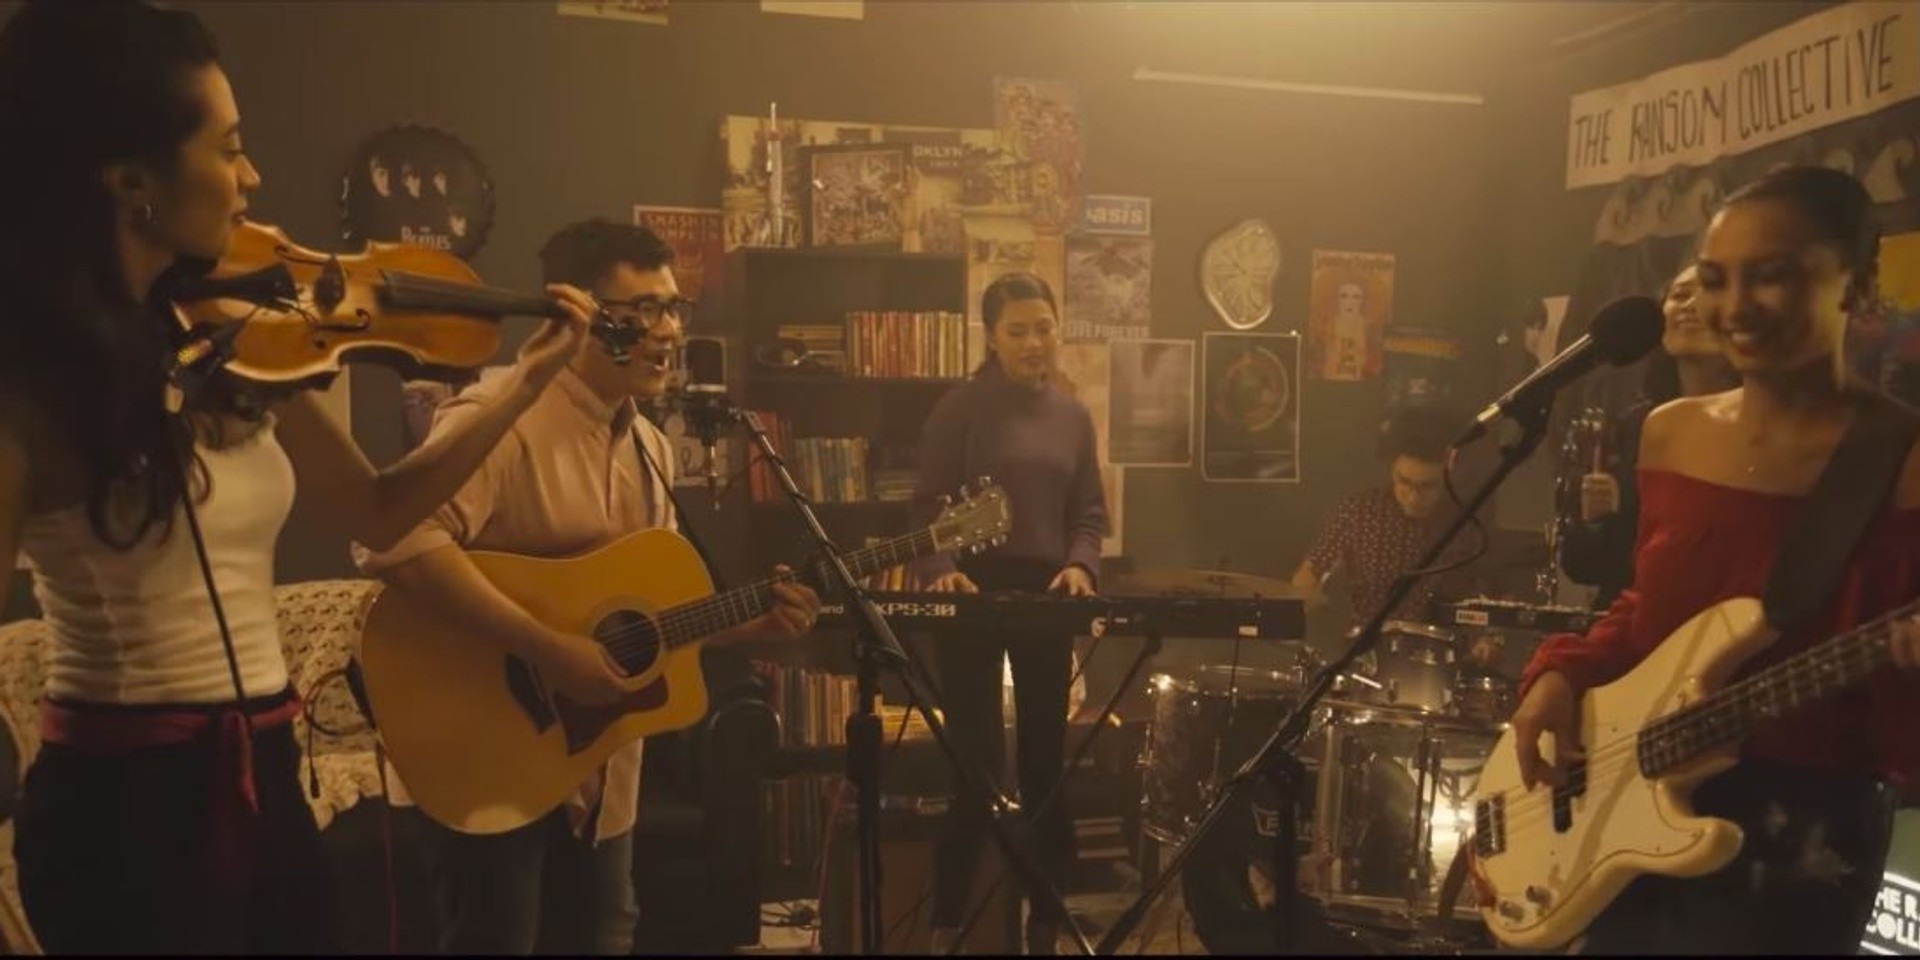 The Ransom Collective unveil 'Tides' video – watch